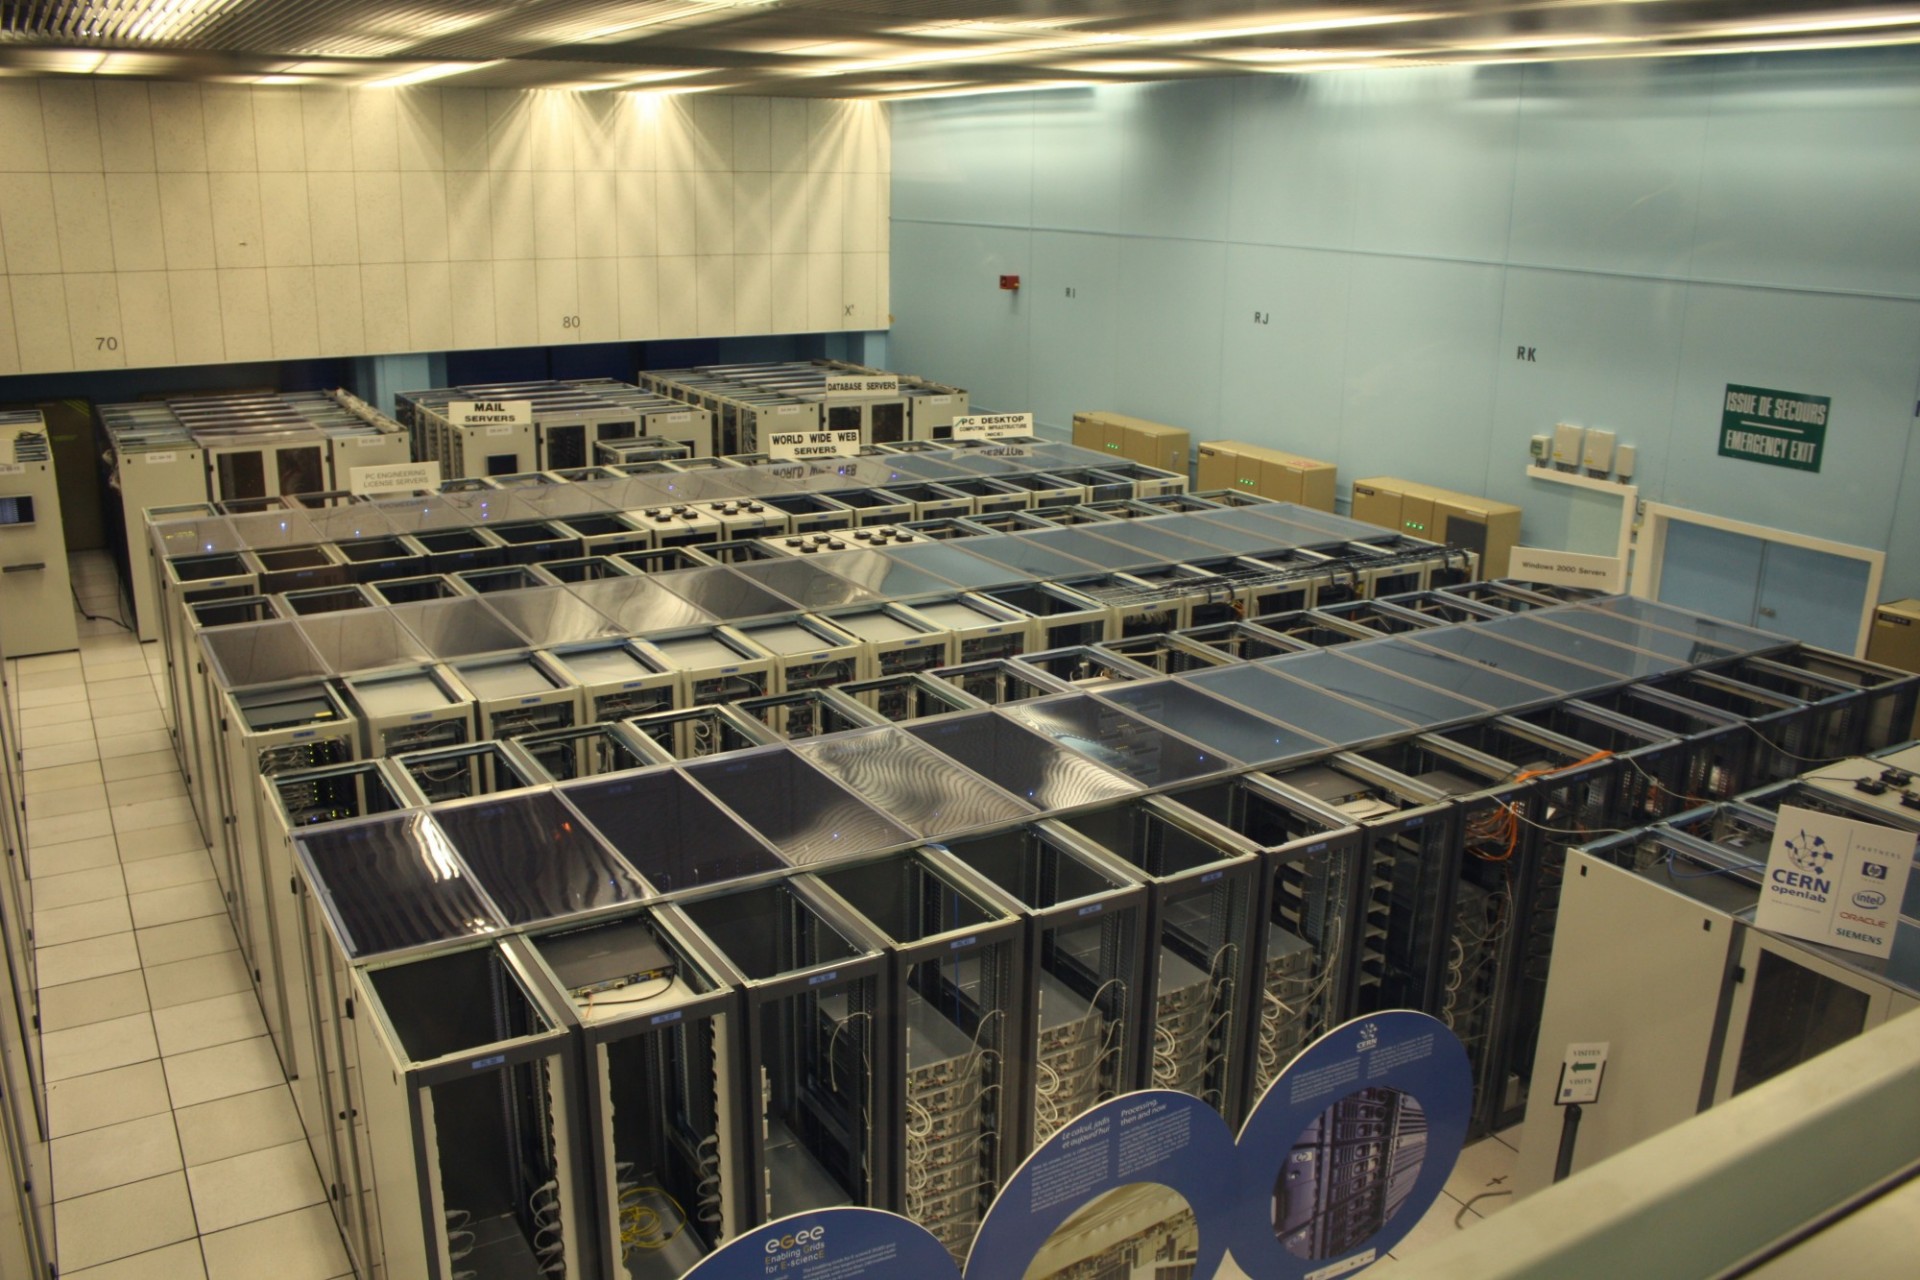 The CERN datacenter with World Wide Web and Mail servers. Source: Wikimedia Commons, CC BY-SA 3.0.